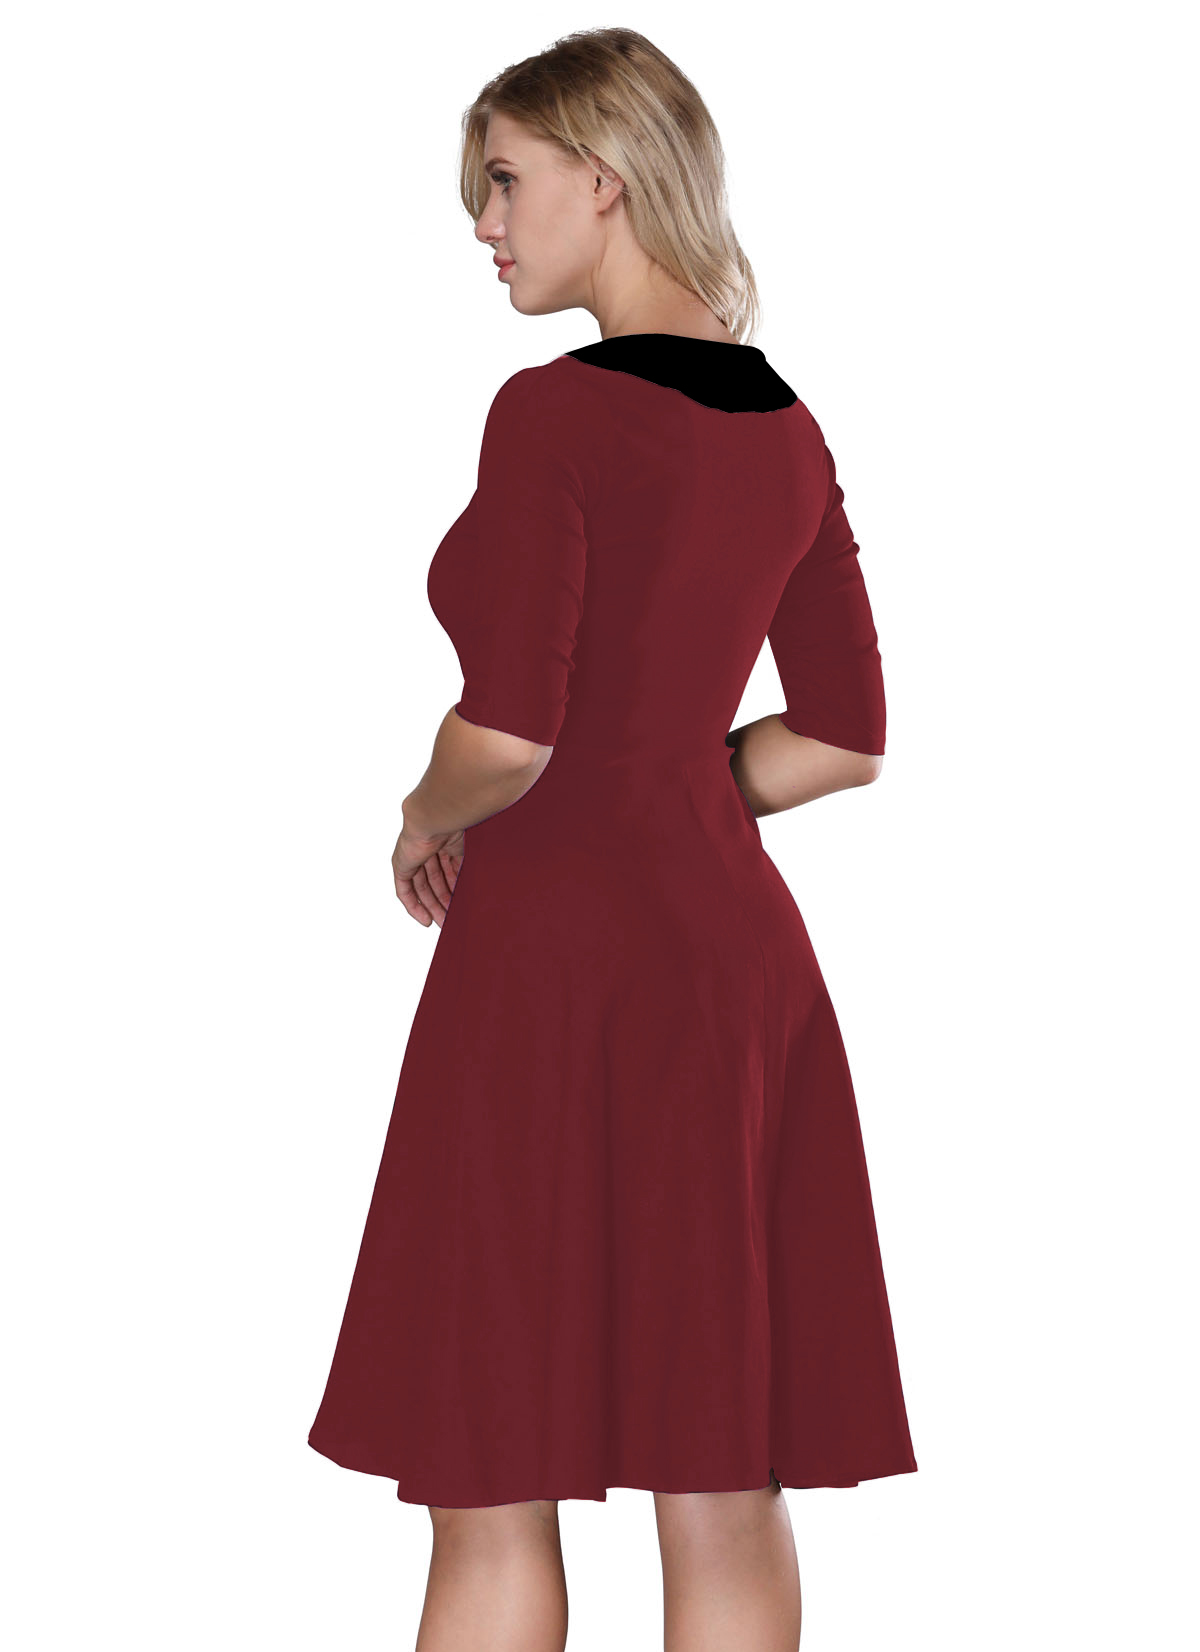 F2529-2 Wine Red & Black   Retro Vintage Style Cocktail Party Swing Dress